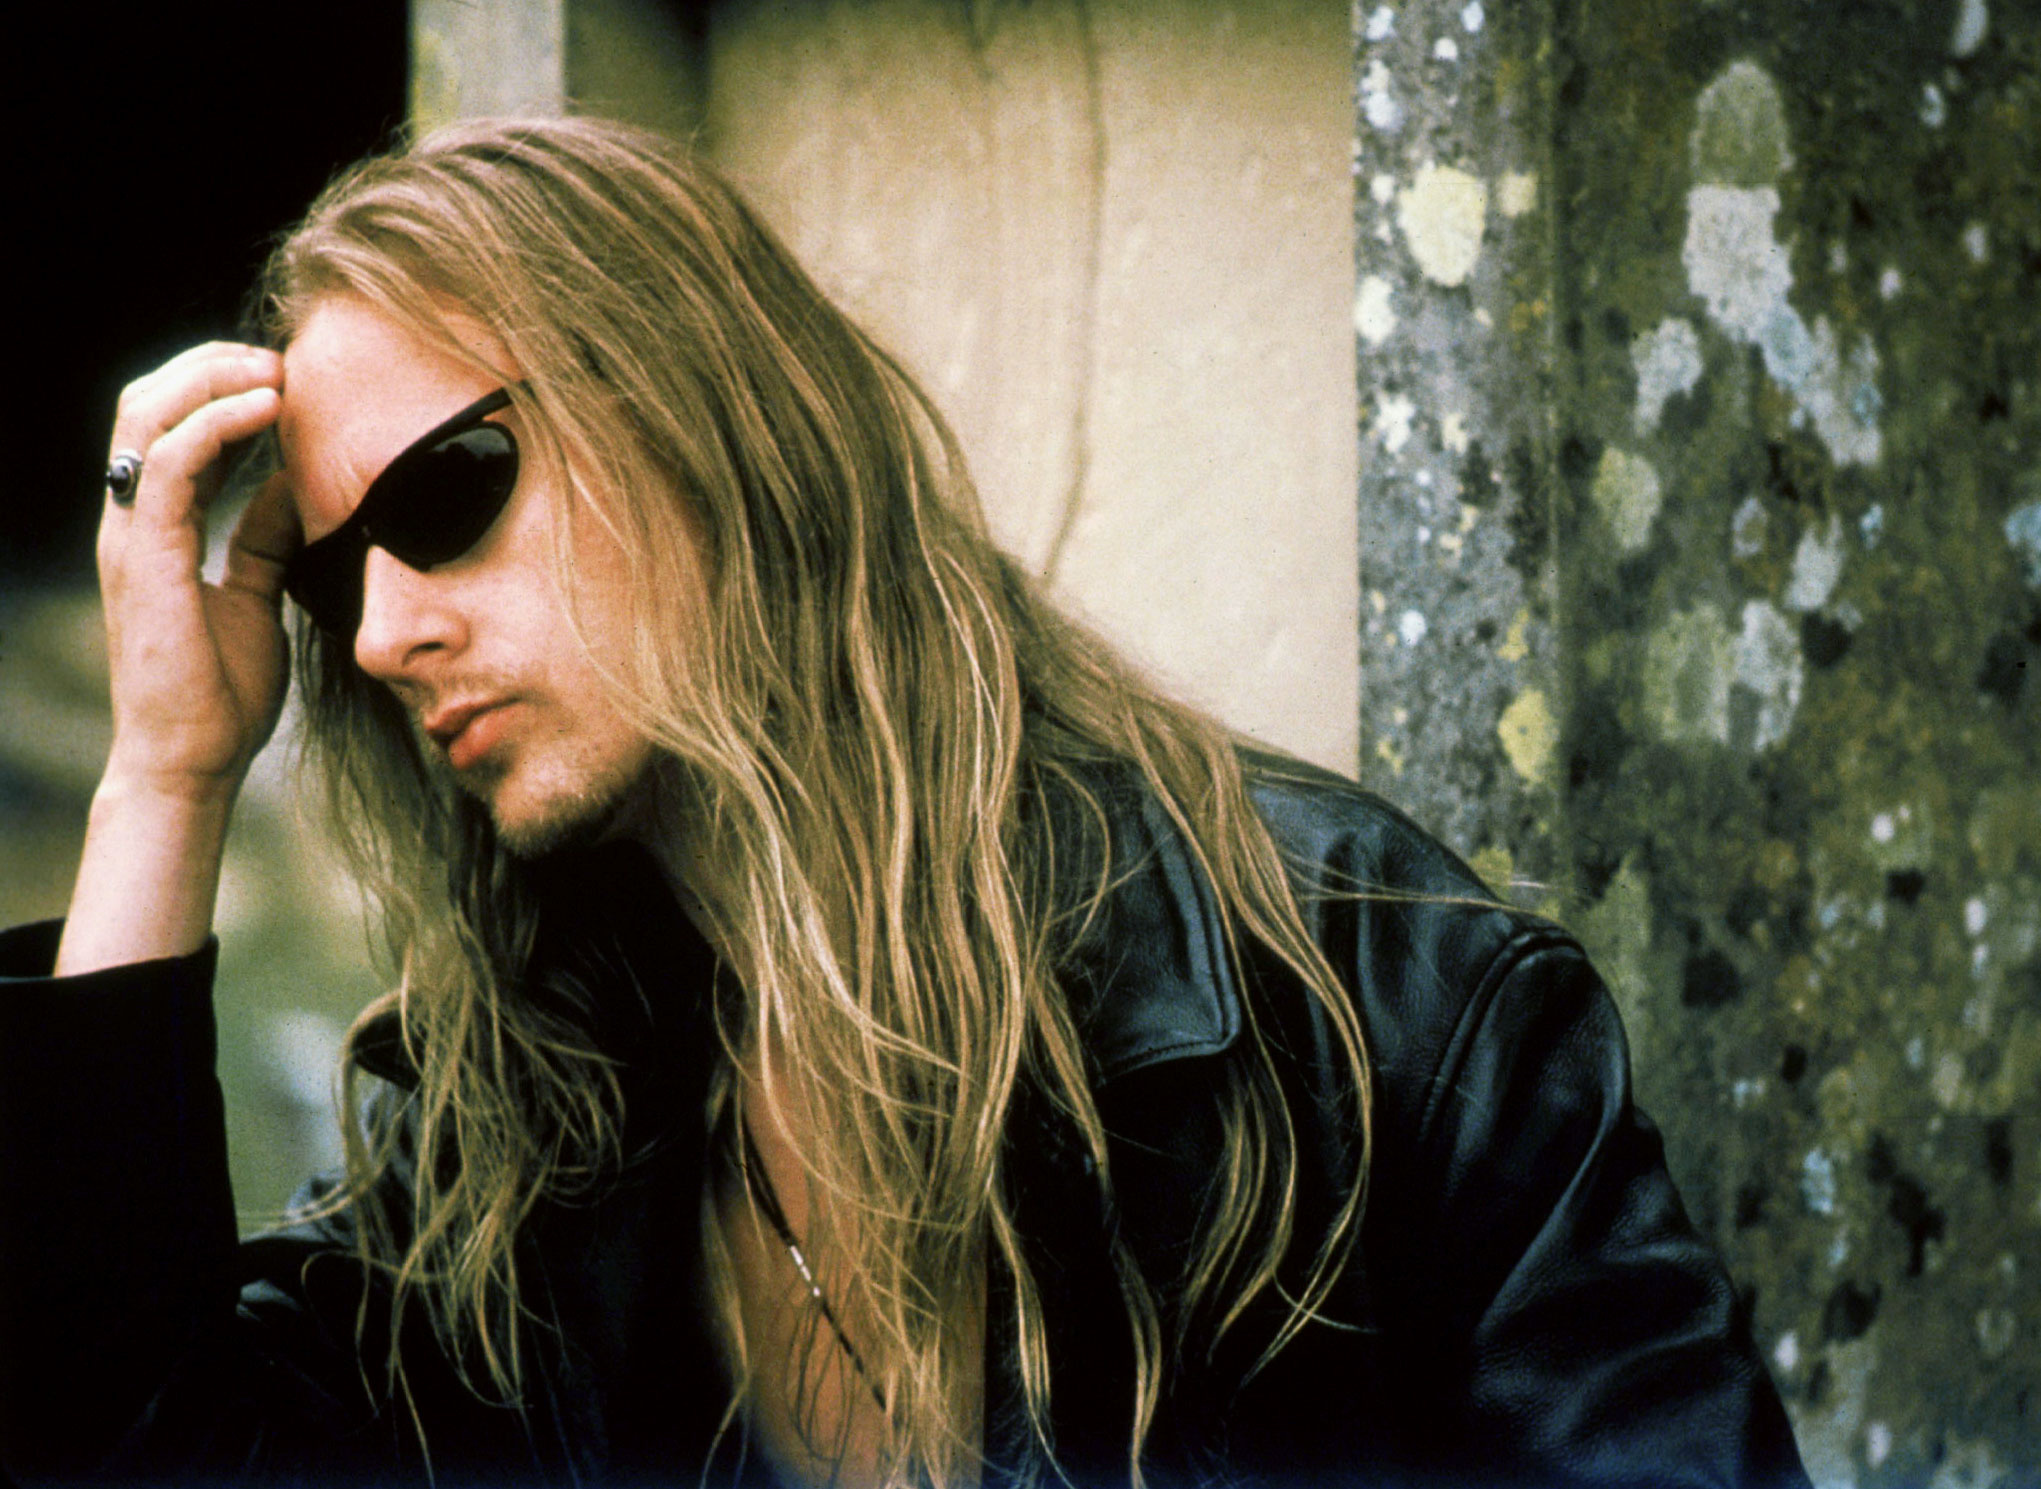 Jerry Cantrell wallpapers, Music, HQ Jerry Cantrell pictures | 4K Wallpapers 2019 2050x1490